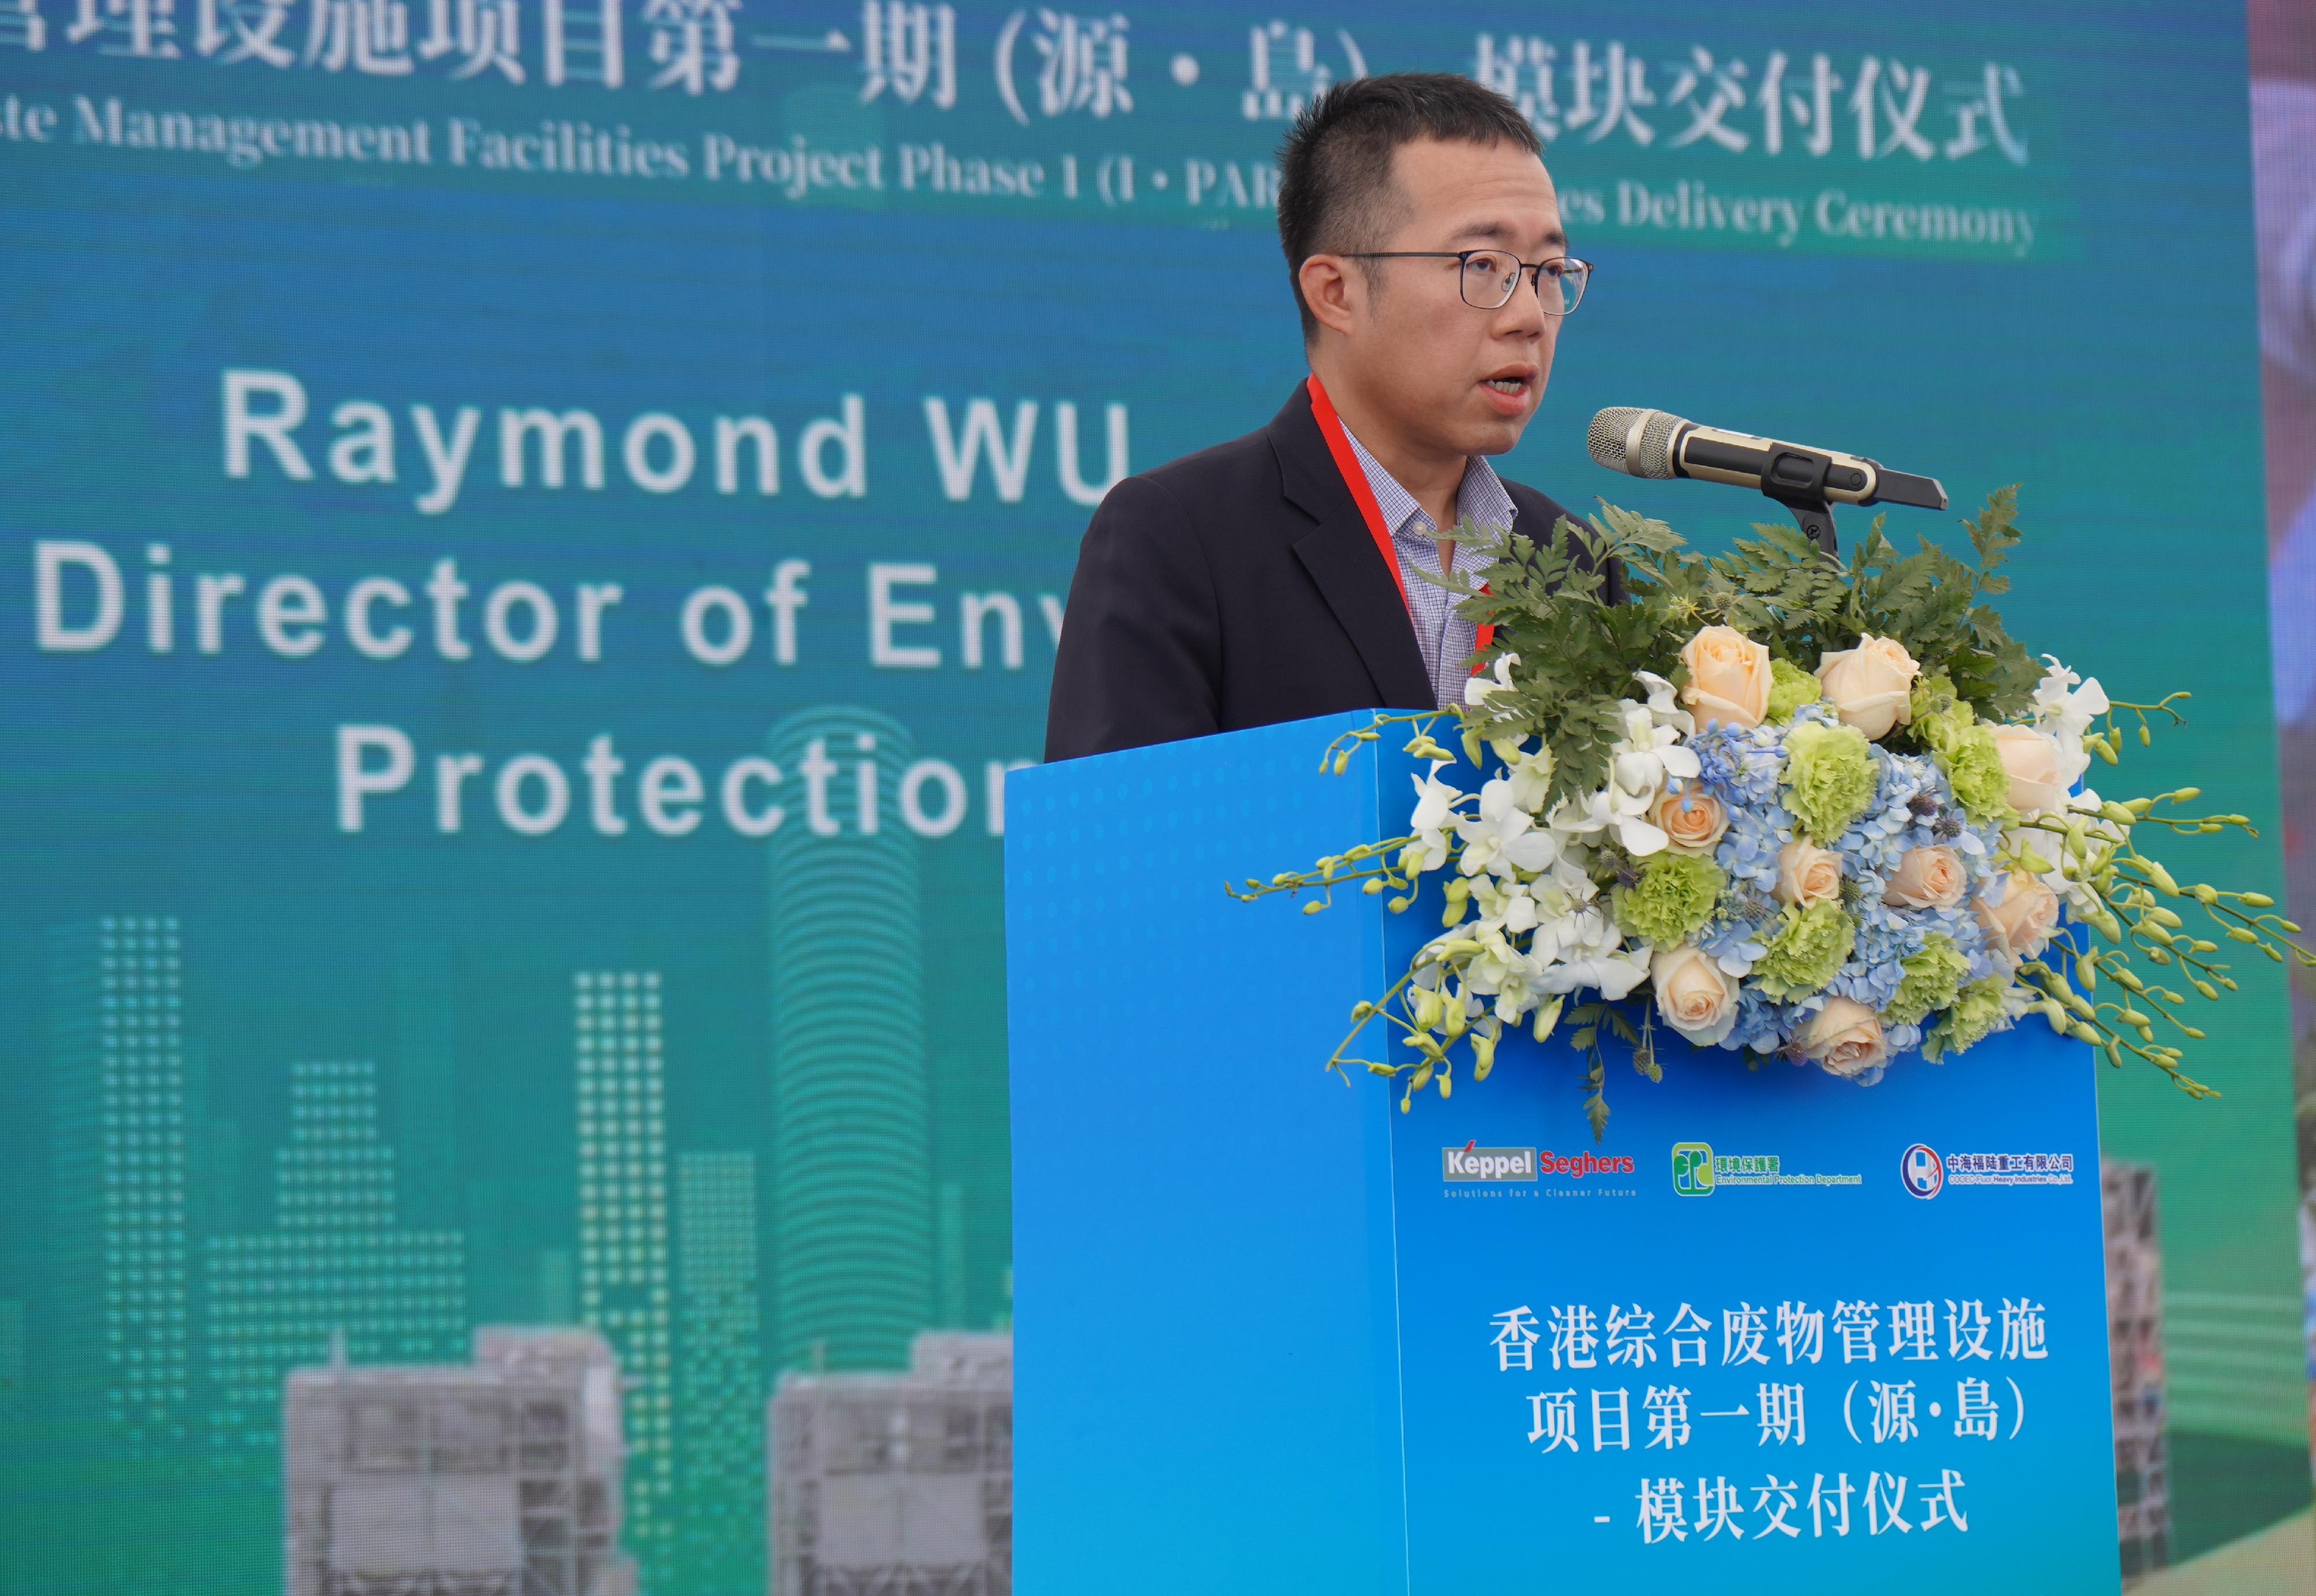 The prefabrication of electrical and mechanical equipment modules for I·PARK1, Hong Kong's first waste-to-energy facility for treating municipal solid waste has been successfully completed. Deputy Director of Environmental Protection Mr Raymond Wu today (January 19) attended the completion ceremony for the successful deliveries of giant electrical and mechanical equipment modules at the prefabrication yard in Zhuhai. Photo shows Mr Wu giving a speech at the ceremony.